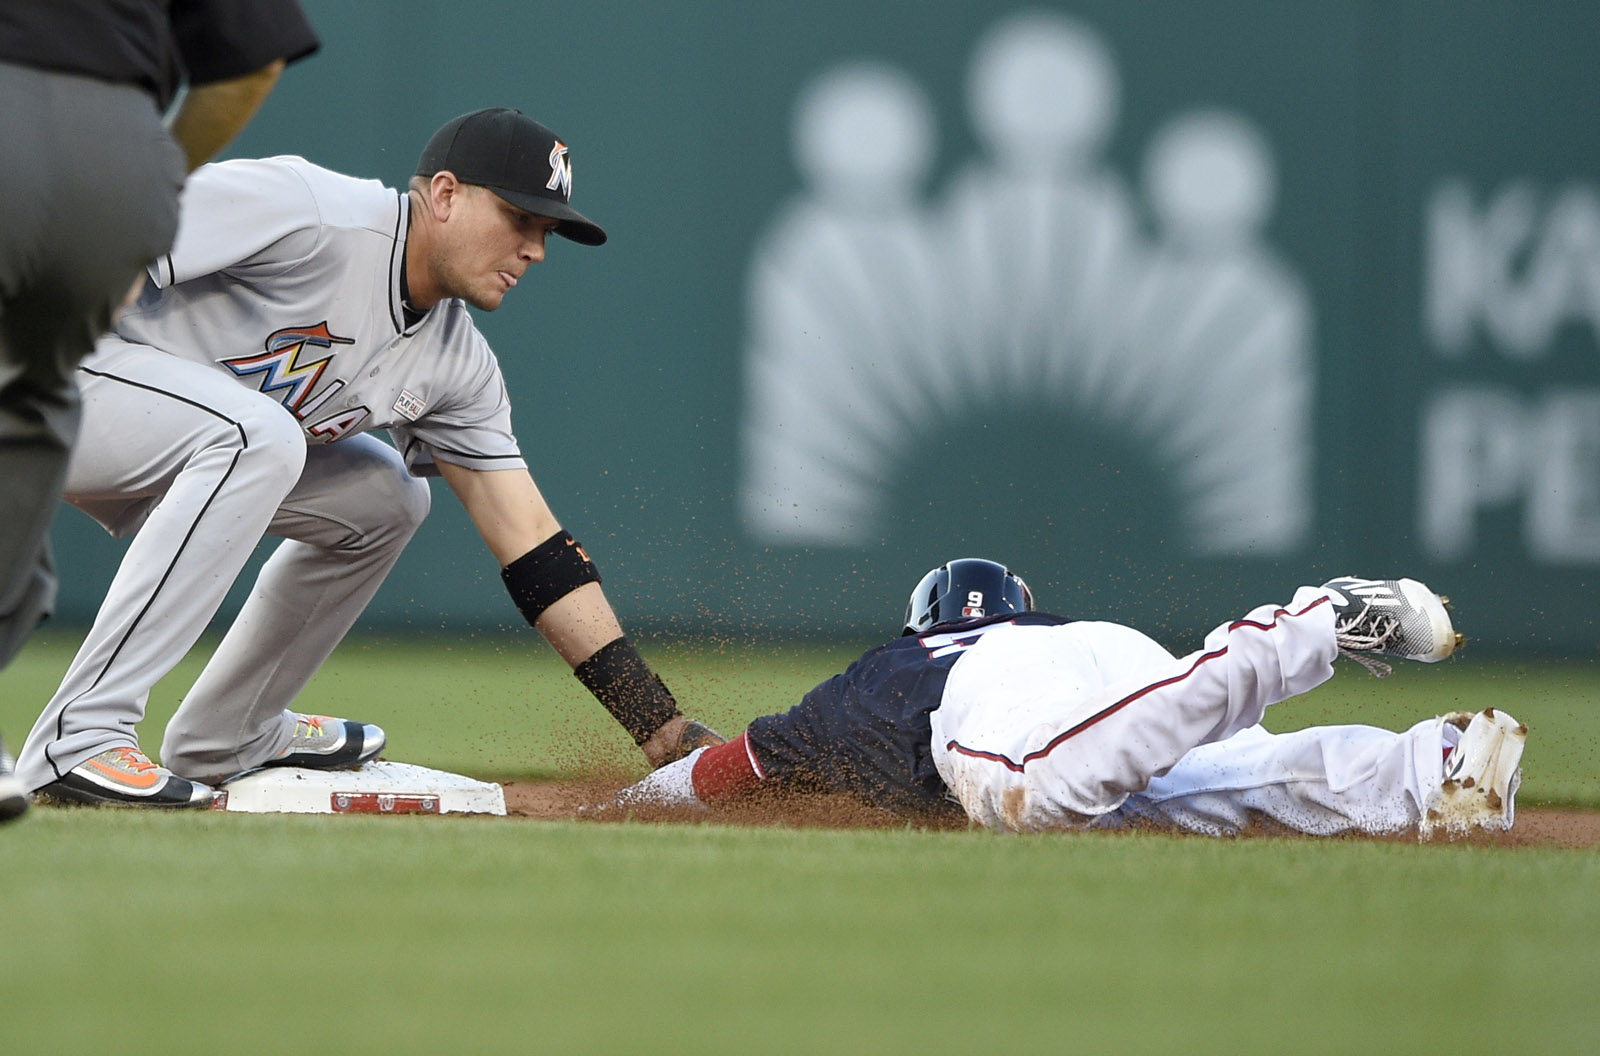 Washington Nationals' Ben Revere, right, is out while trying to steal second by Miami Marlins second baseman Miguel Rojas, left, during the first inning of a baseball game, Friday, May 13, 2016, in Washington. (AP Photo/Nick Wass)